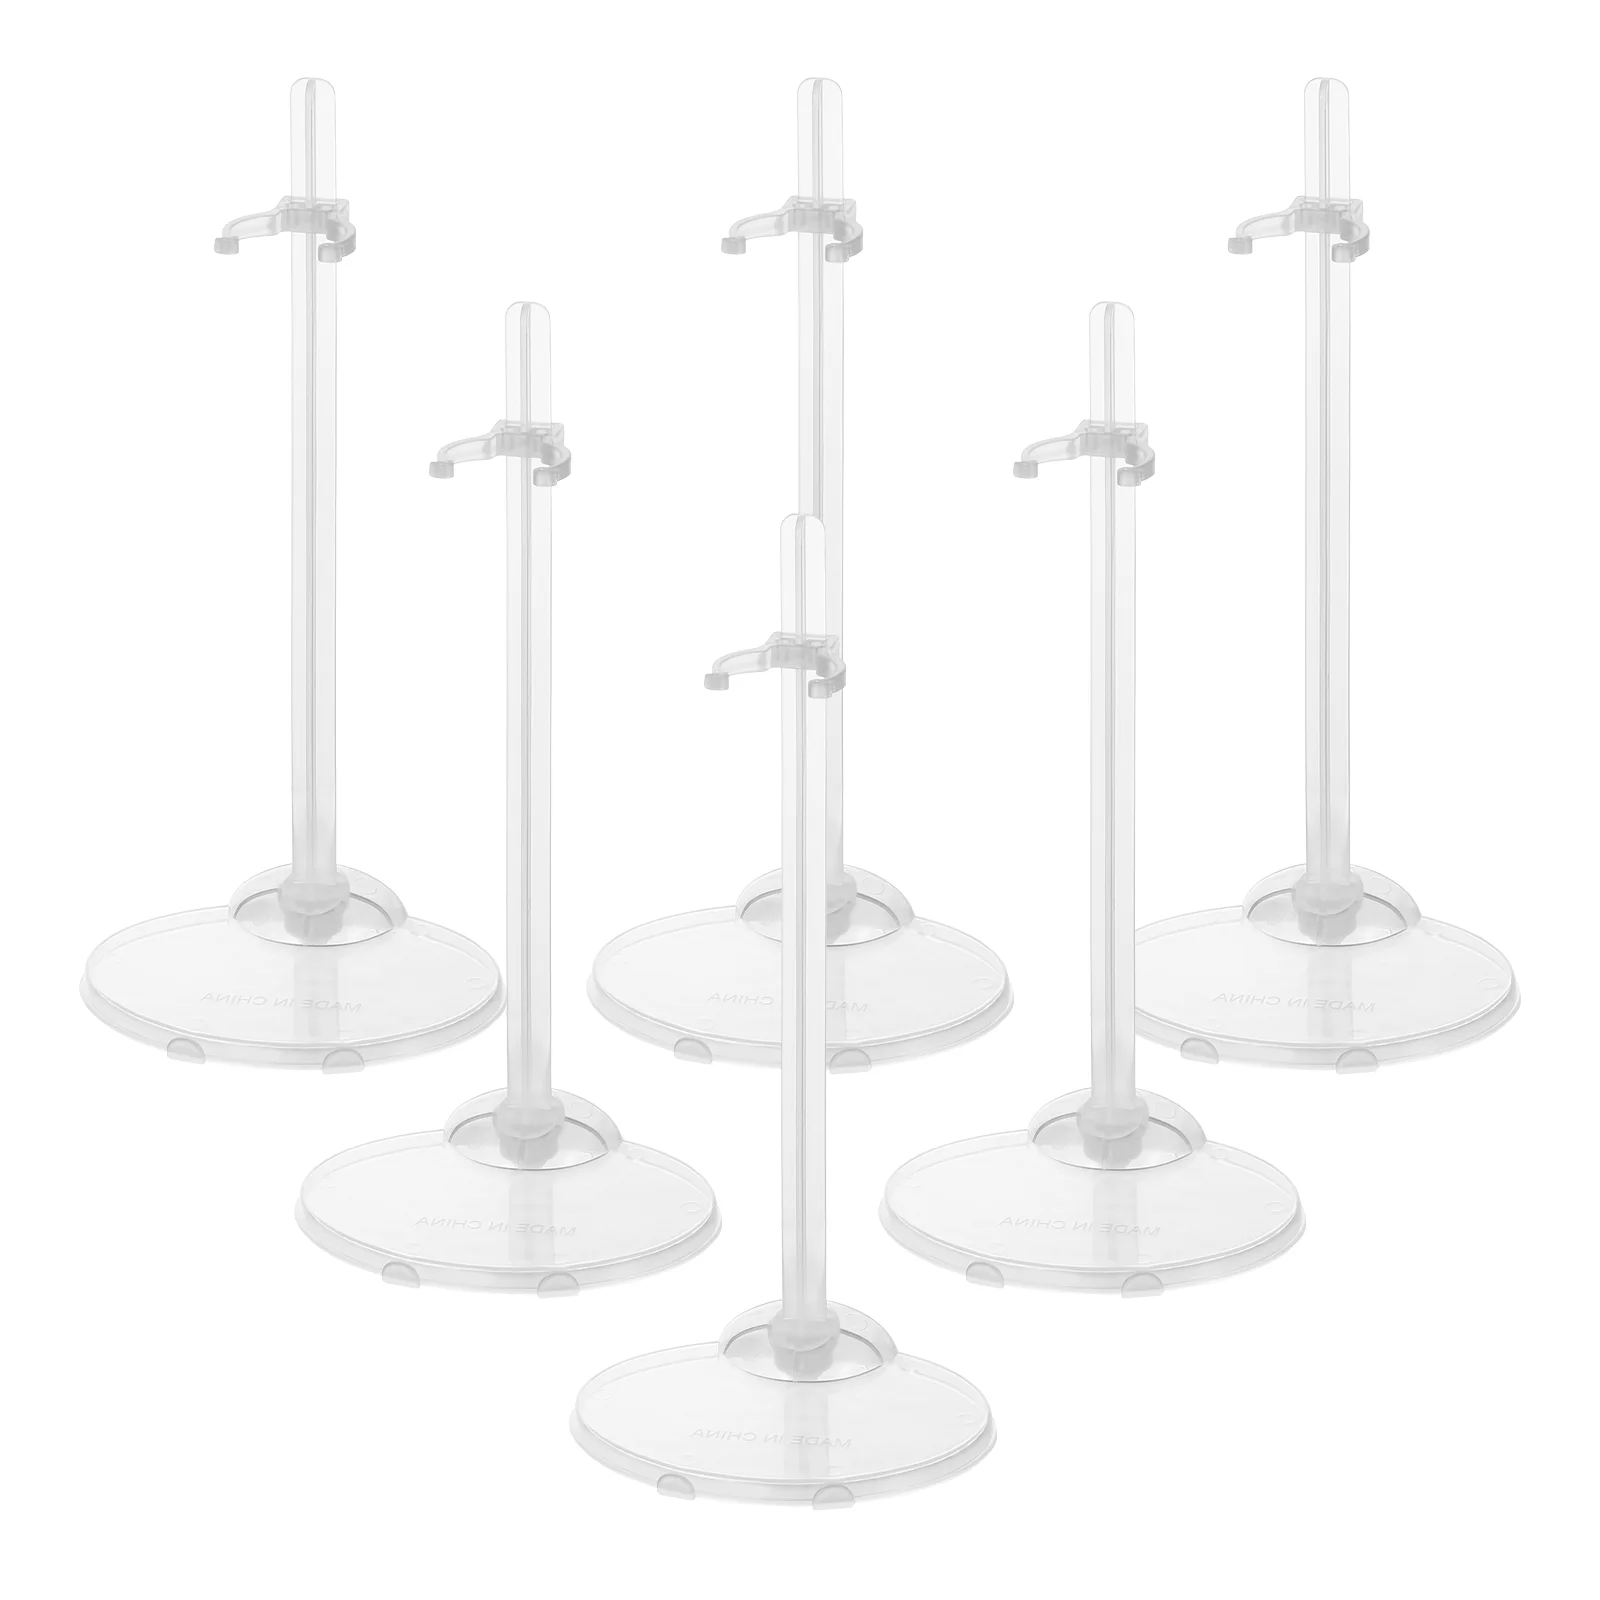 Doll Holding Stand Doll Support Display Rack Adjustable Transparent Model Furniture Plastic Mannequin Dolls Accessories 10 pcs dolls toy display stand support prop up mannequin model holder